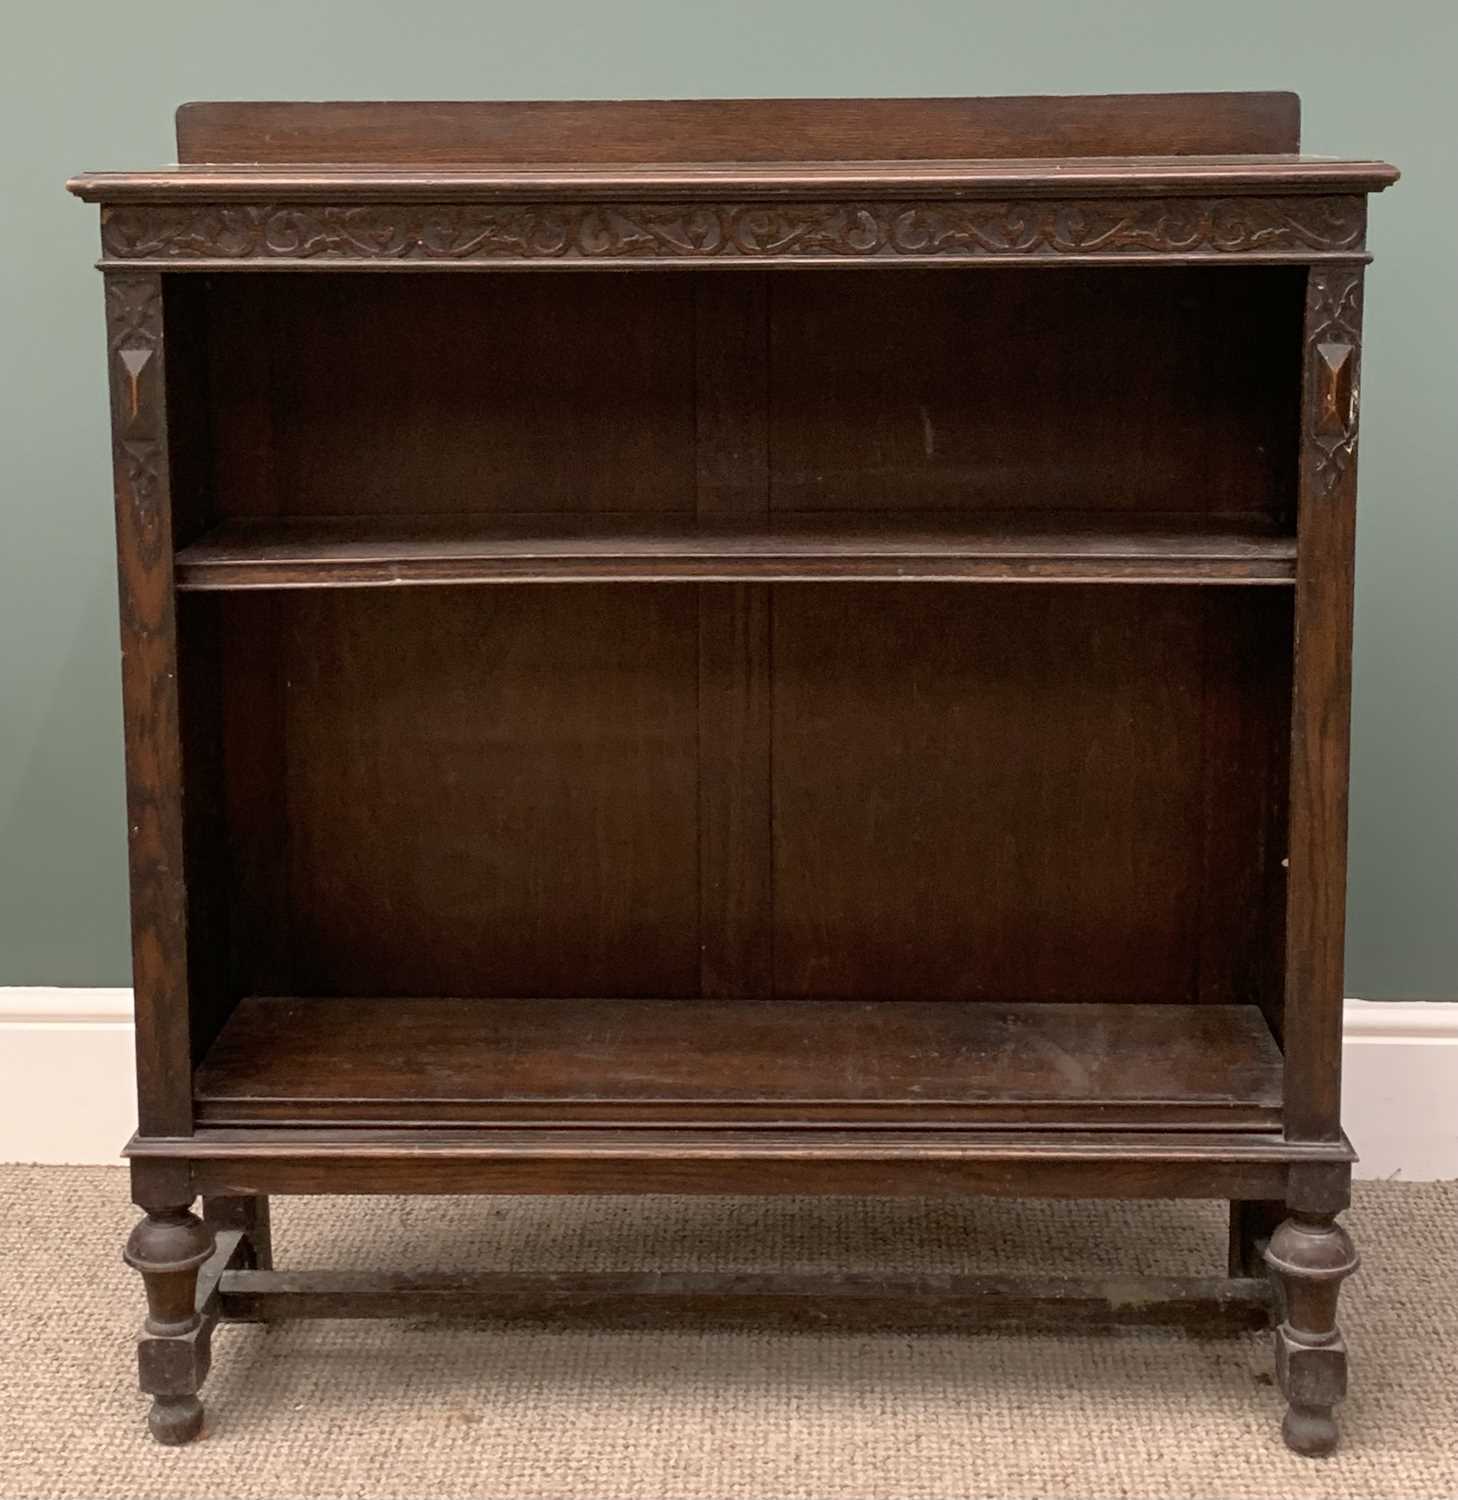 EDWARDIAN CARVED OAK OPEN BOOKCASE, 101 (h) x 91 (w) x 26 (d) cms Provenance: Private collection